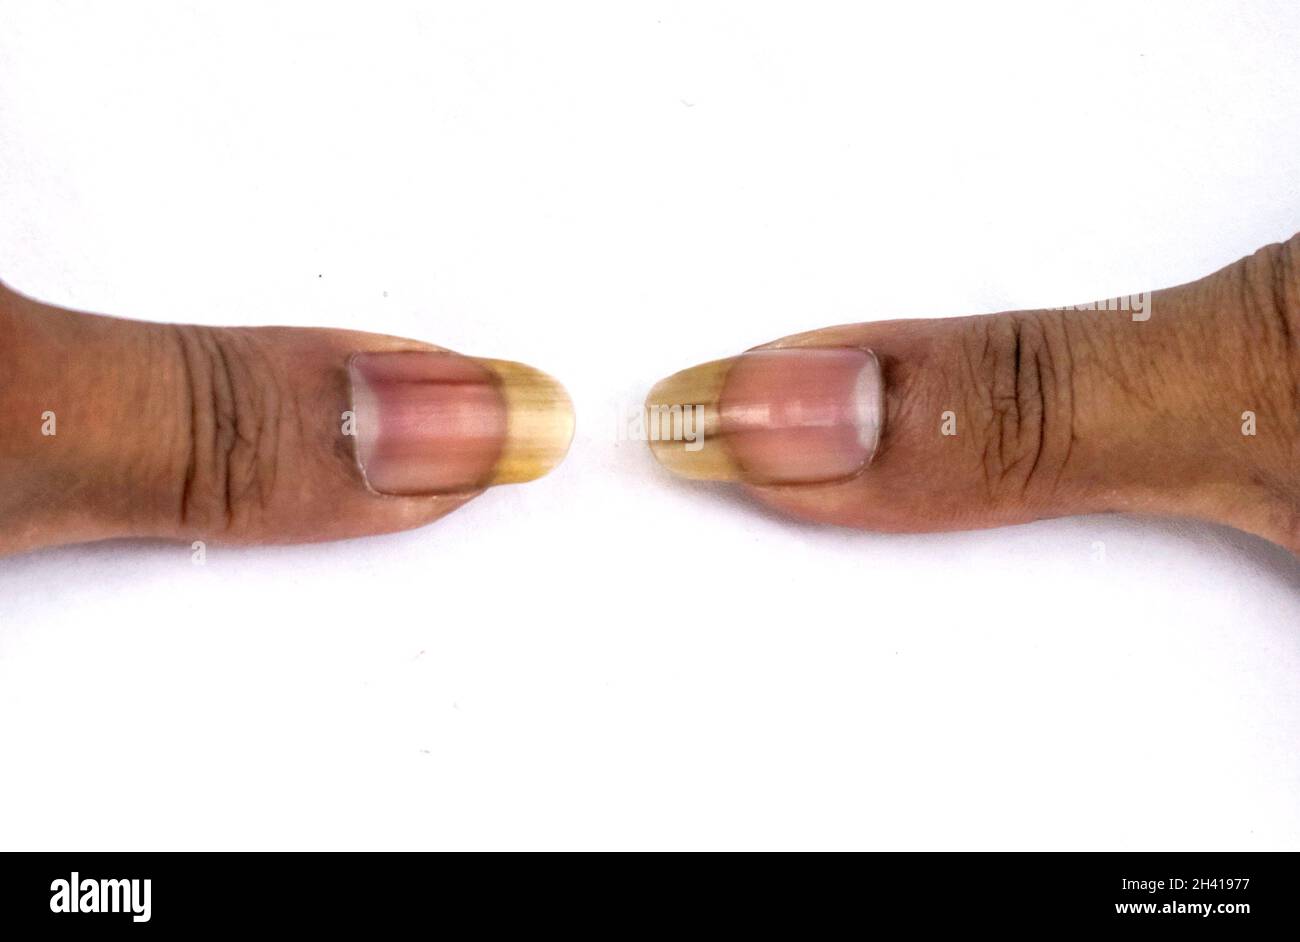 A human showing his big and dirty nails on white background Stock Photo